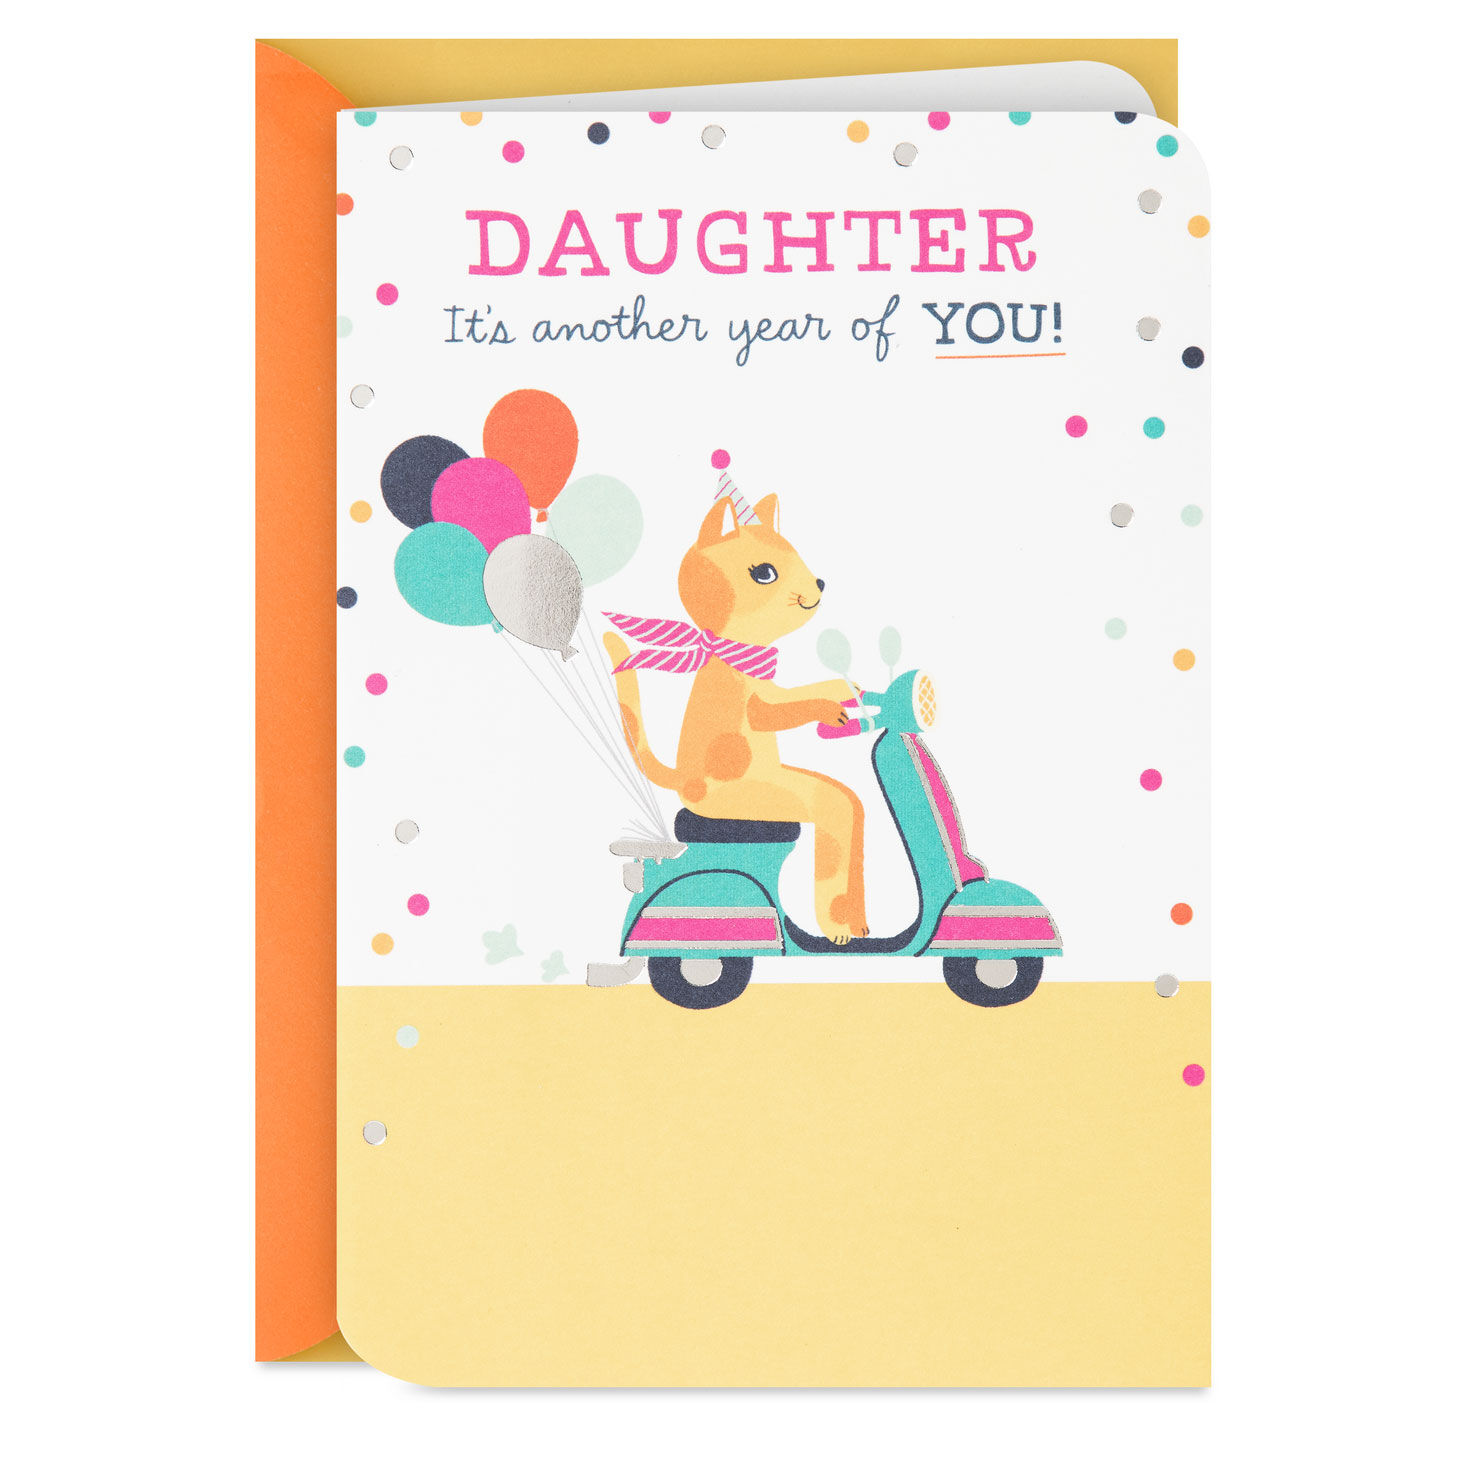 Another Year of You Birthday Card for Daughter for only USD 2.99 | Hallmark